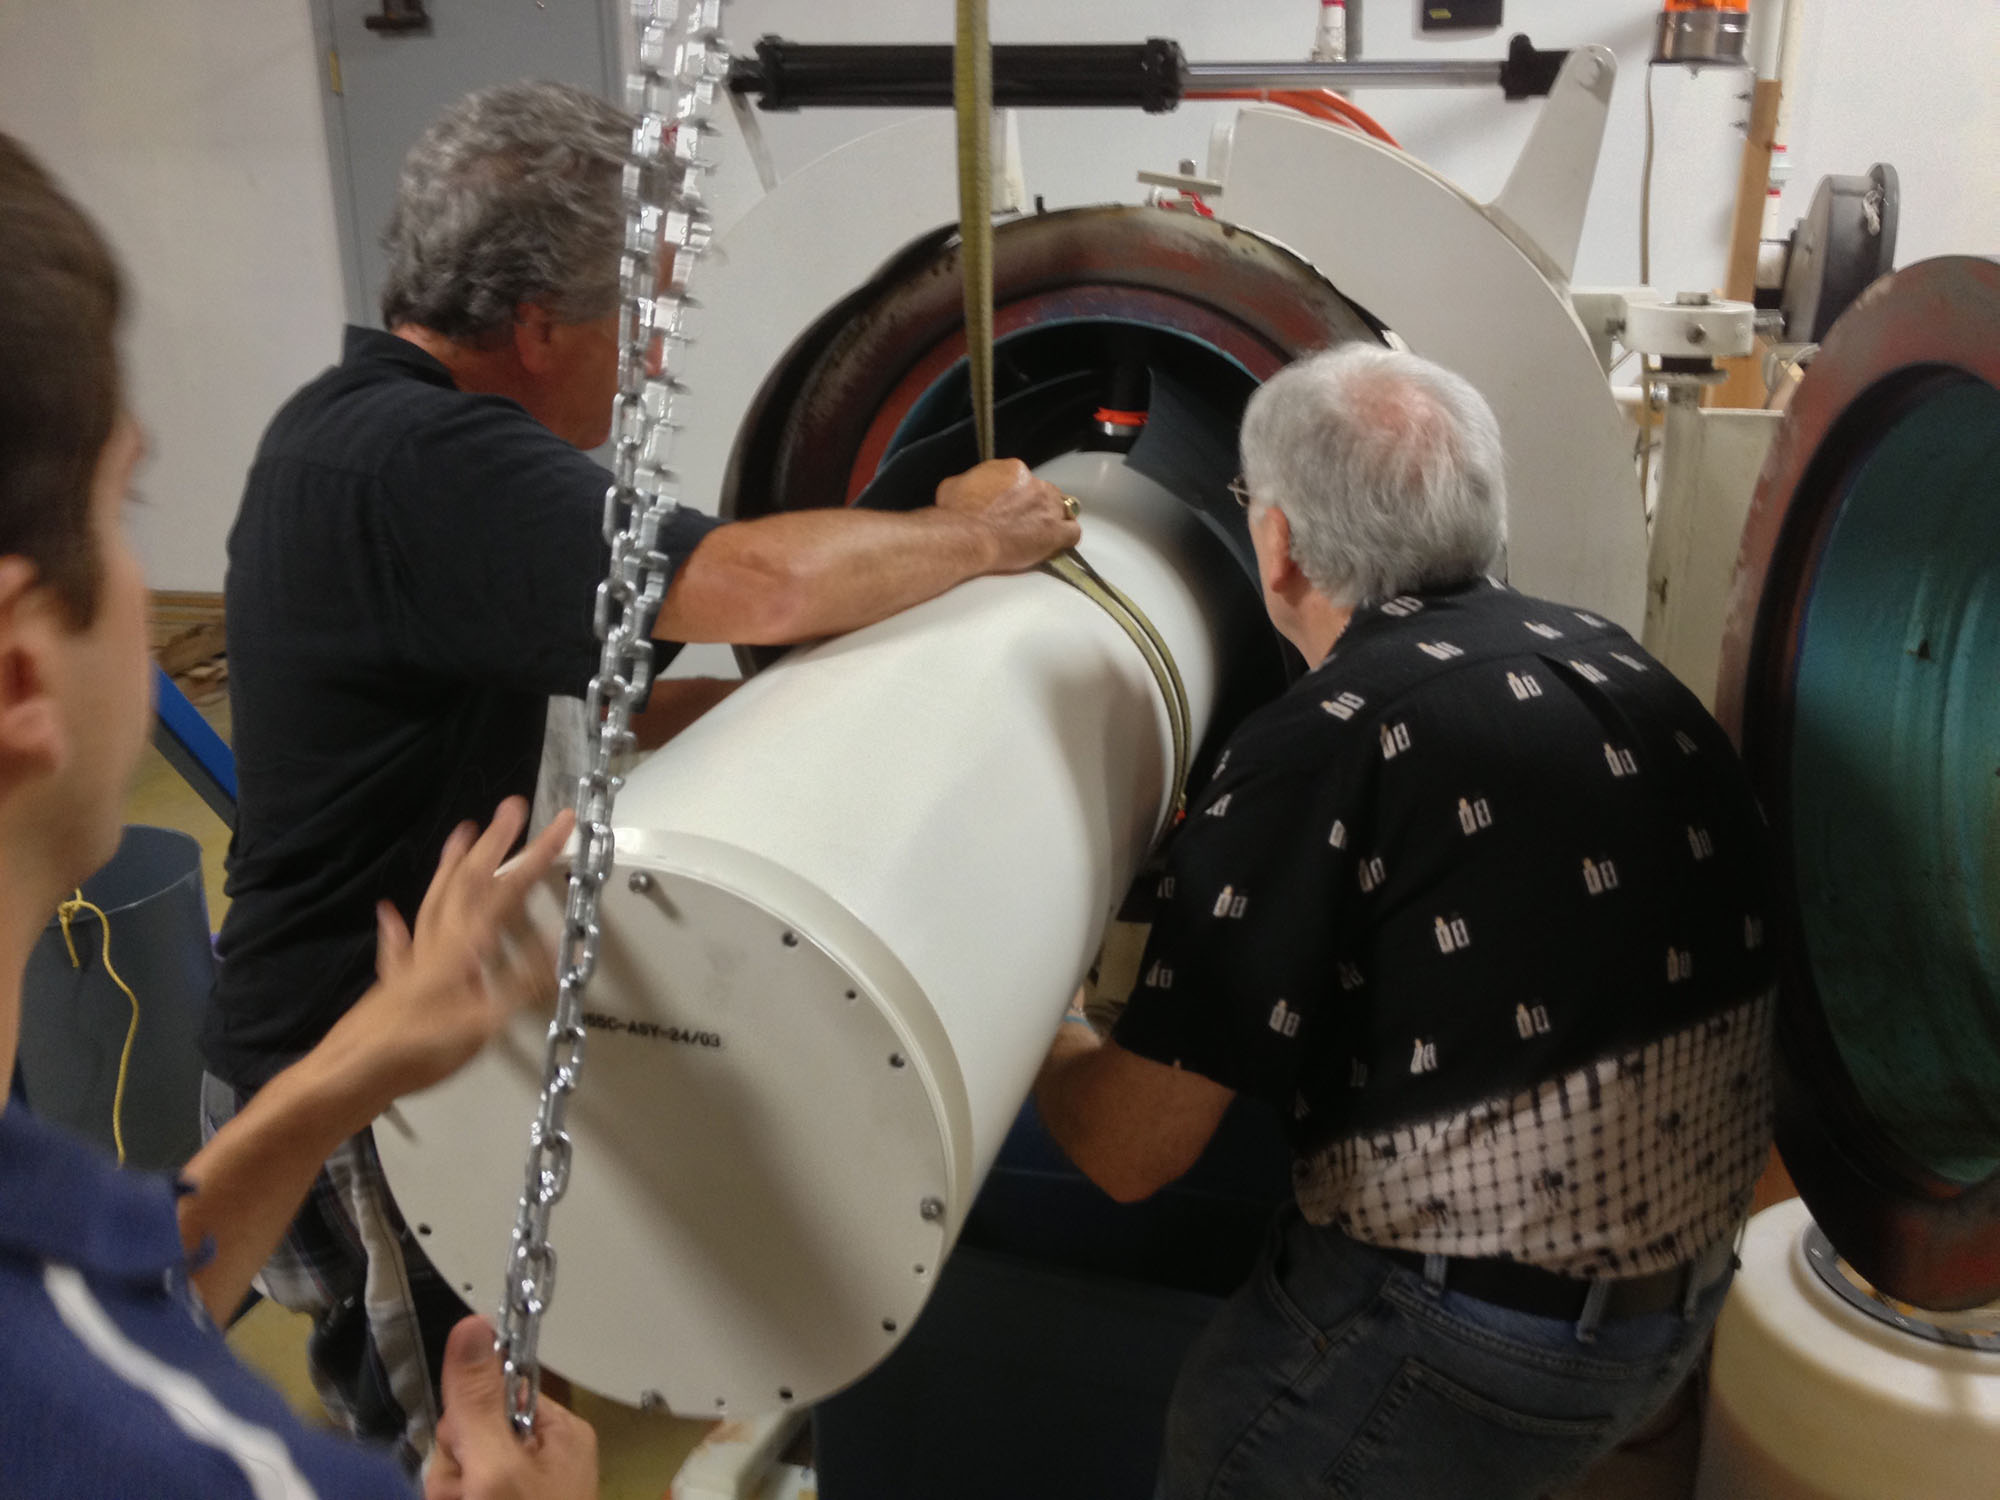 Loading Subsea Bottle into Hyperbaric Chamber